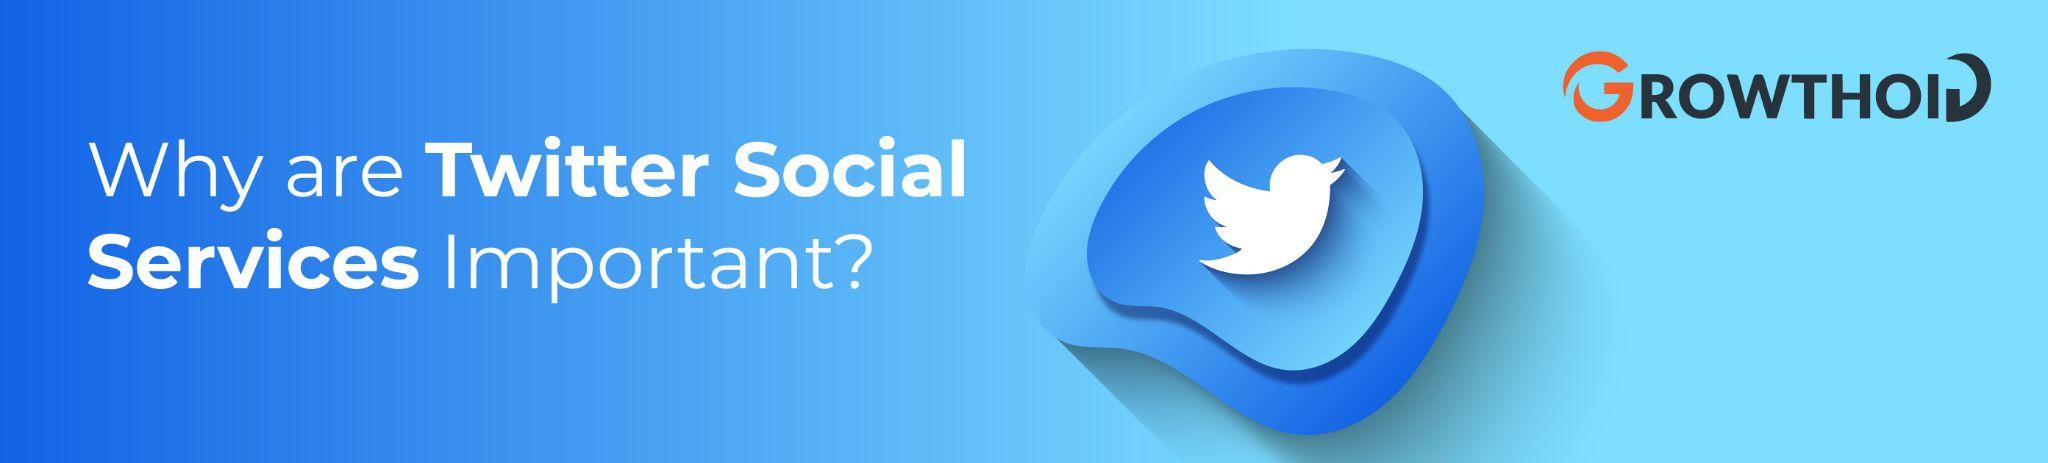 Why are Twitter Social Services Important?